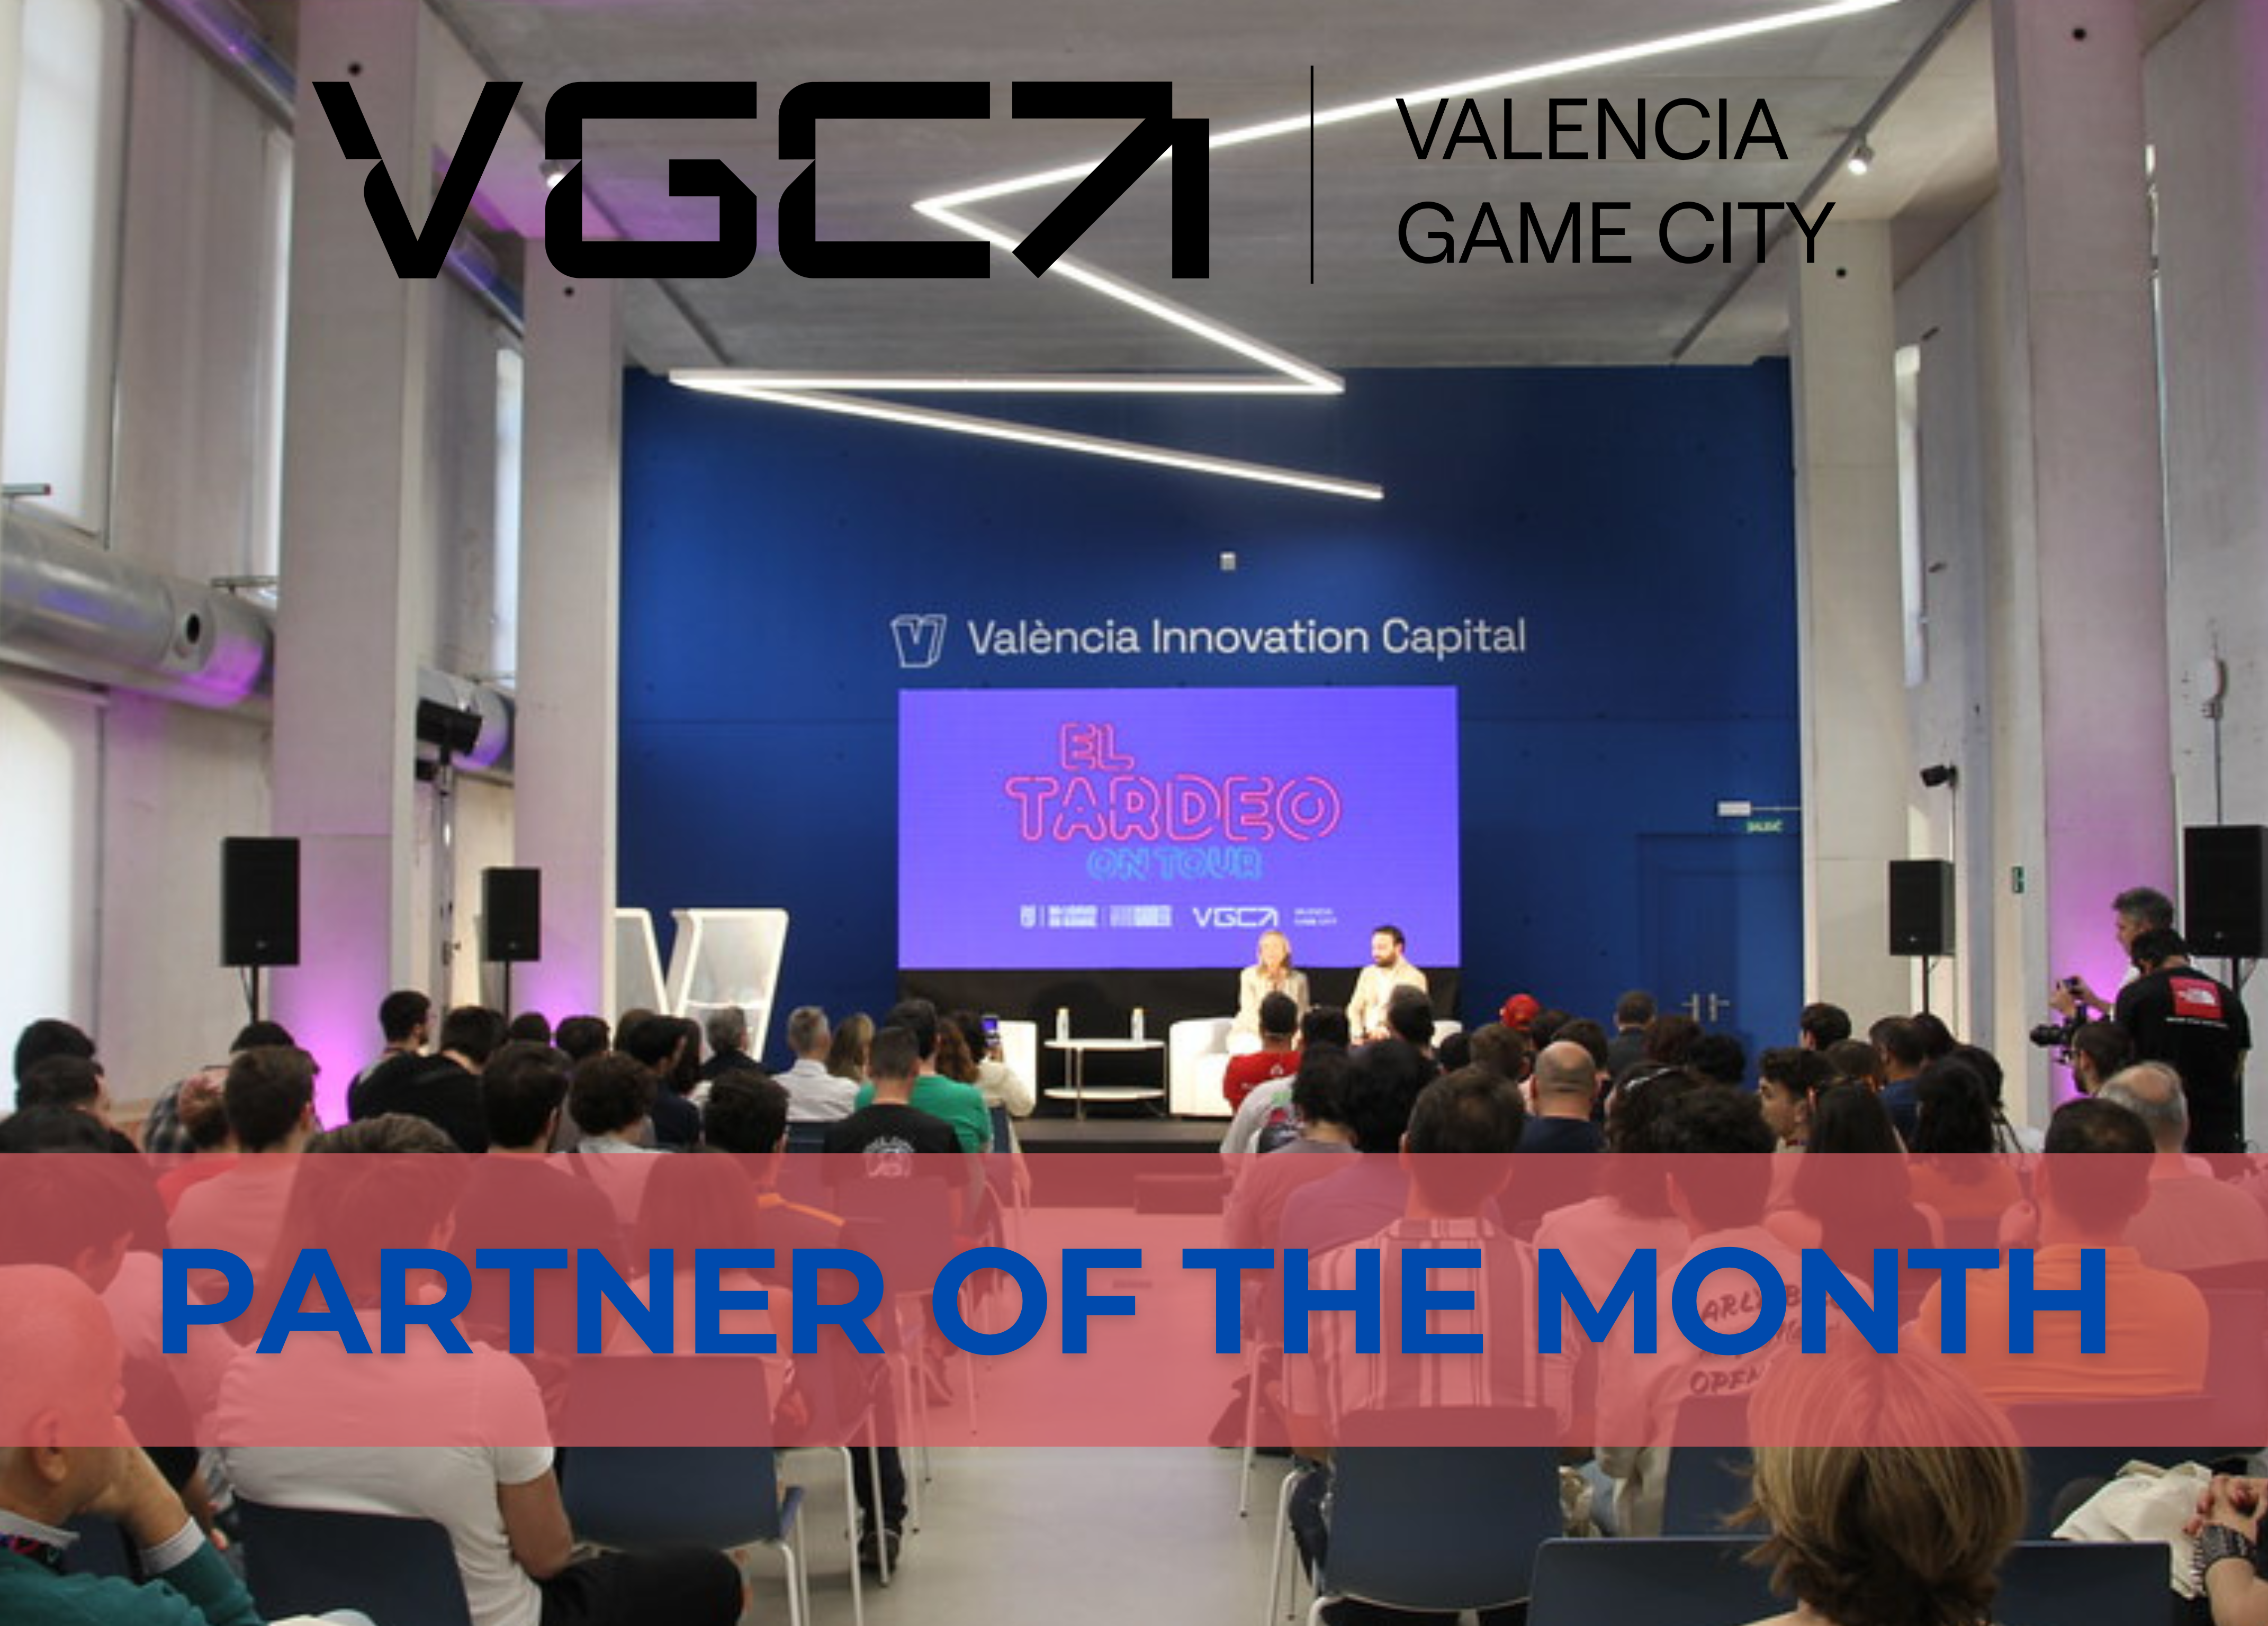 “Valencia Game City will position the city as a leader in the Spanish gaming industry”